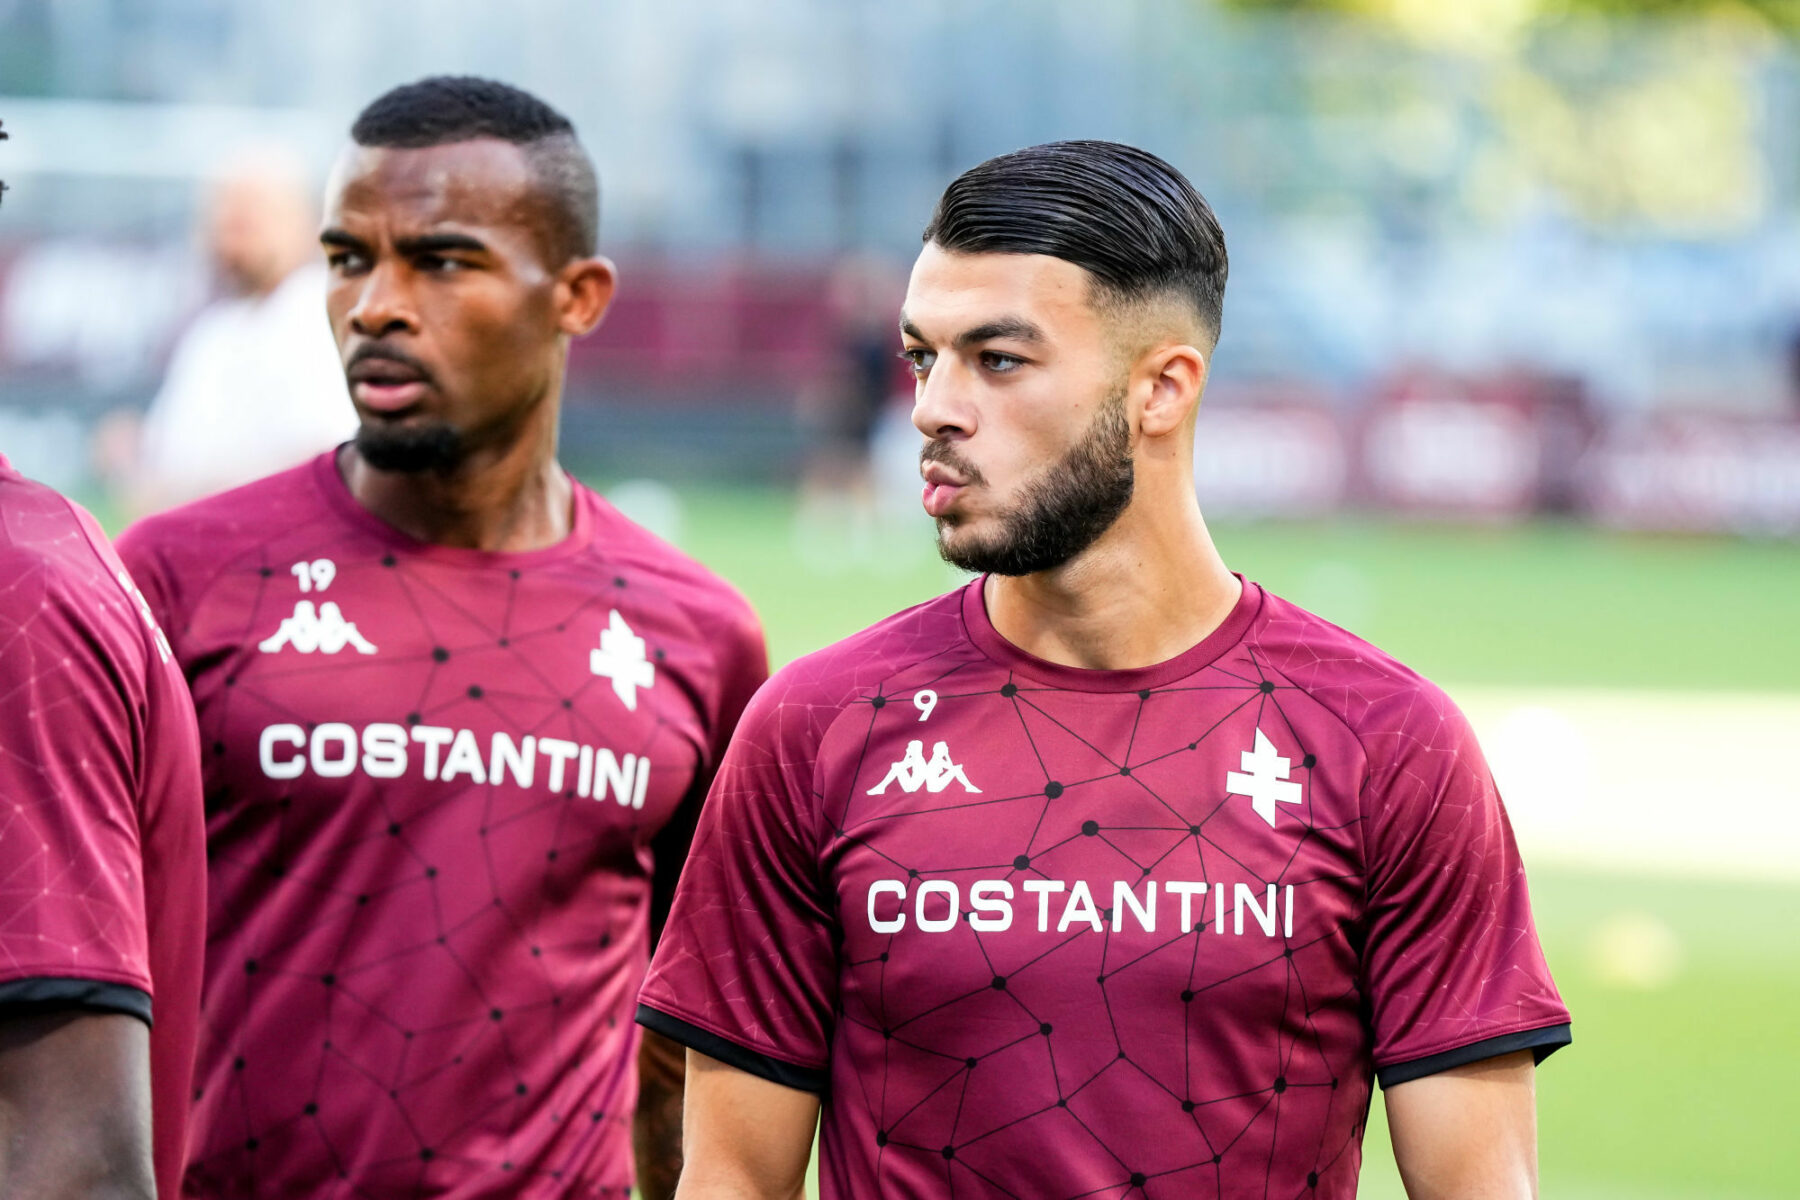  Georges Mikautadze, a Georgian professional footballer who plays as a forward for Ligue 1 club Metz, looks on during a match.